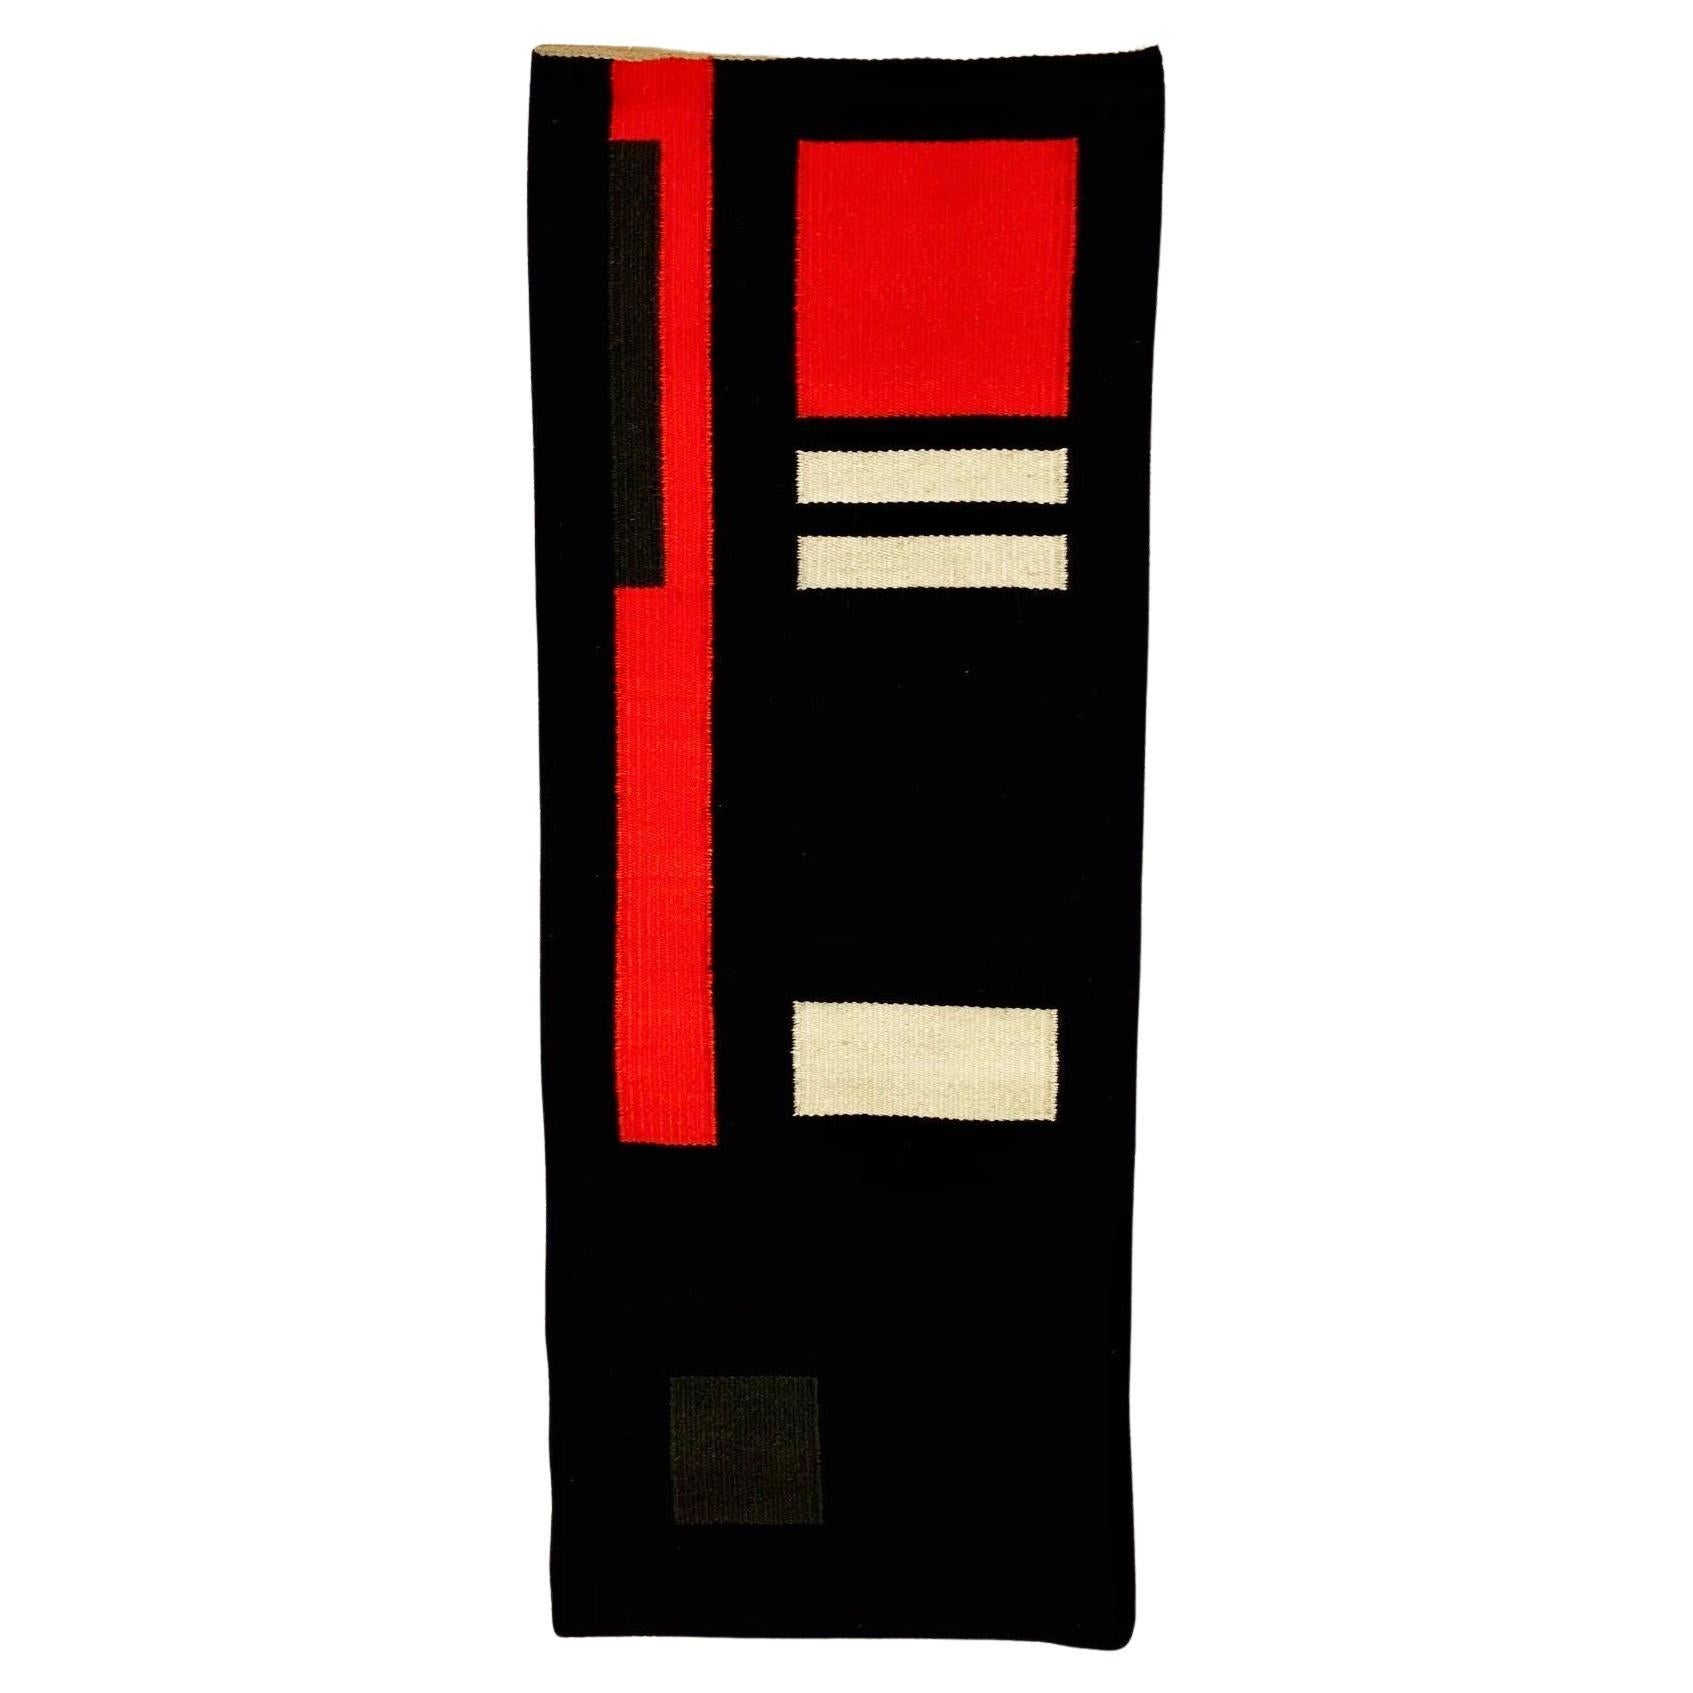 Abstract Modernist Wall Tapestry by Jette Thyssen Signed & Dated 1972, De Stijl